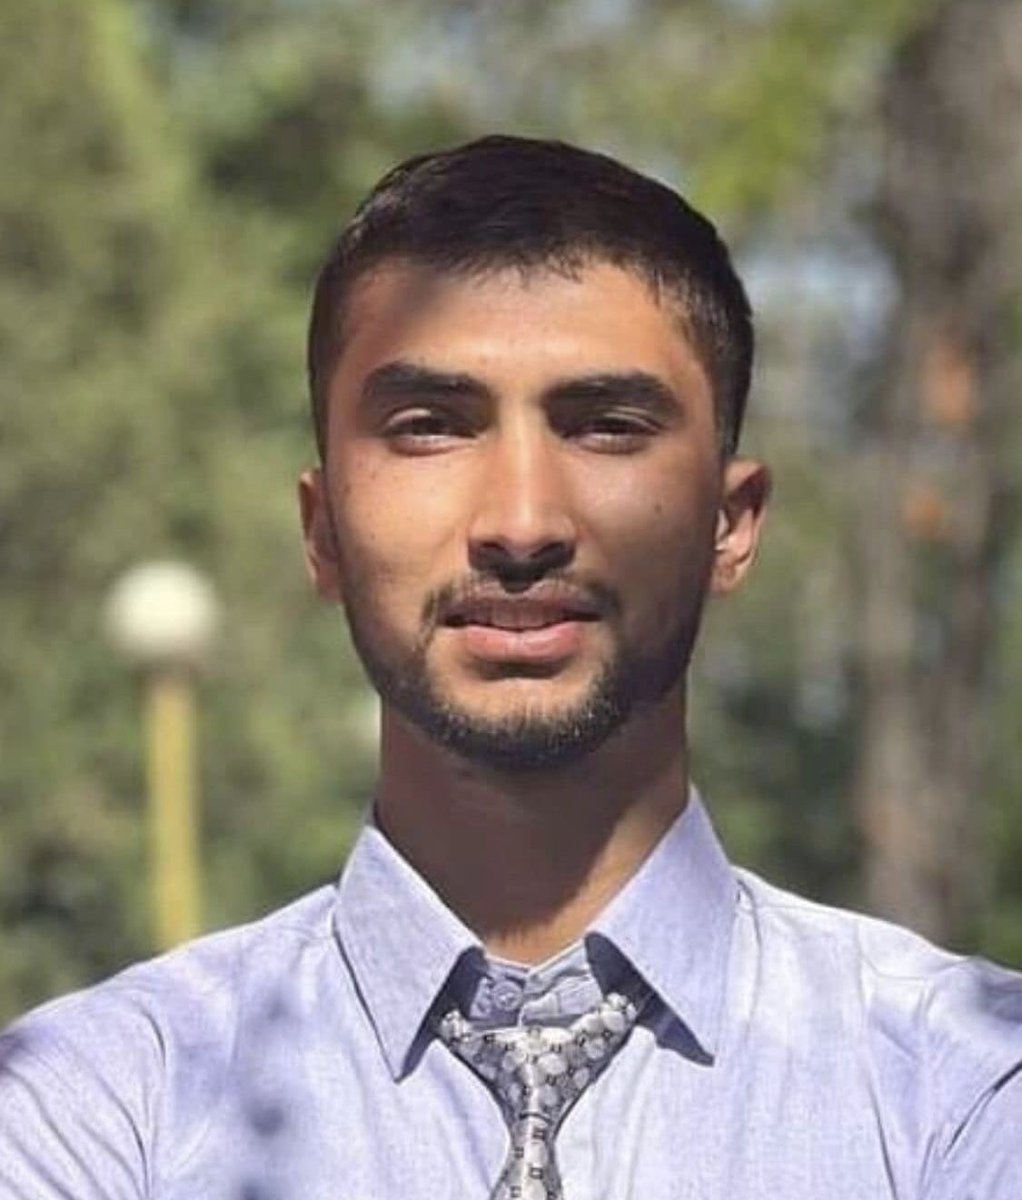 Bipin Joshi is a Nepali student working in the agriculture sector in Israel. His friends who survived the attack on Oct. 07, 2023, told the media that Joshi was taken hostage from a farm near #Gaza border. The whereabouts of Joshi are still unknown. @MofaNepal @PM_nepal_…